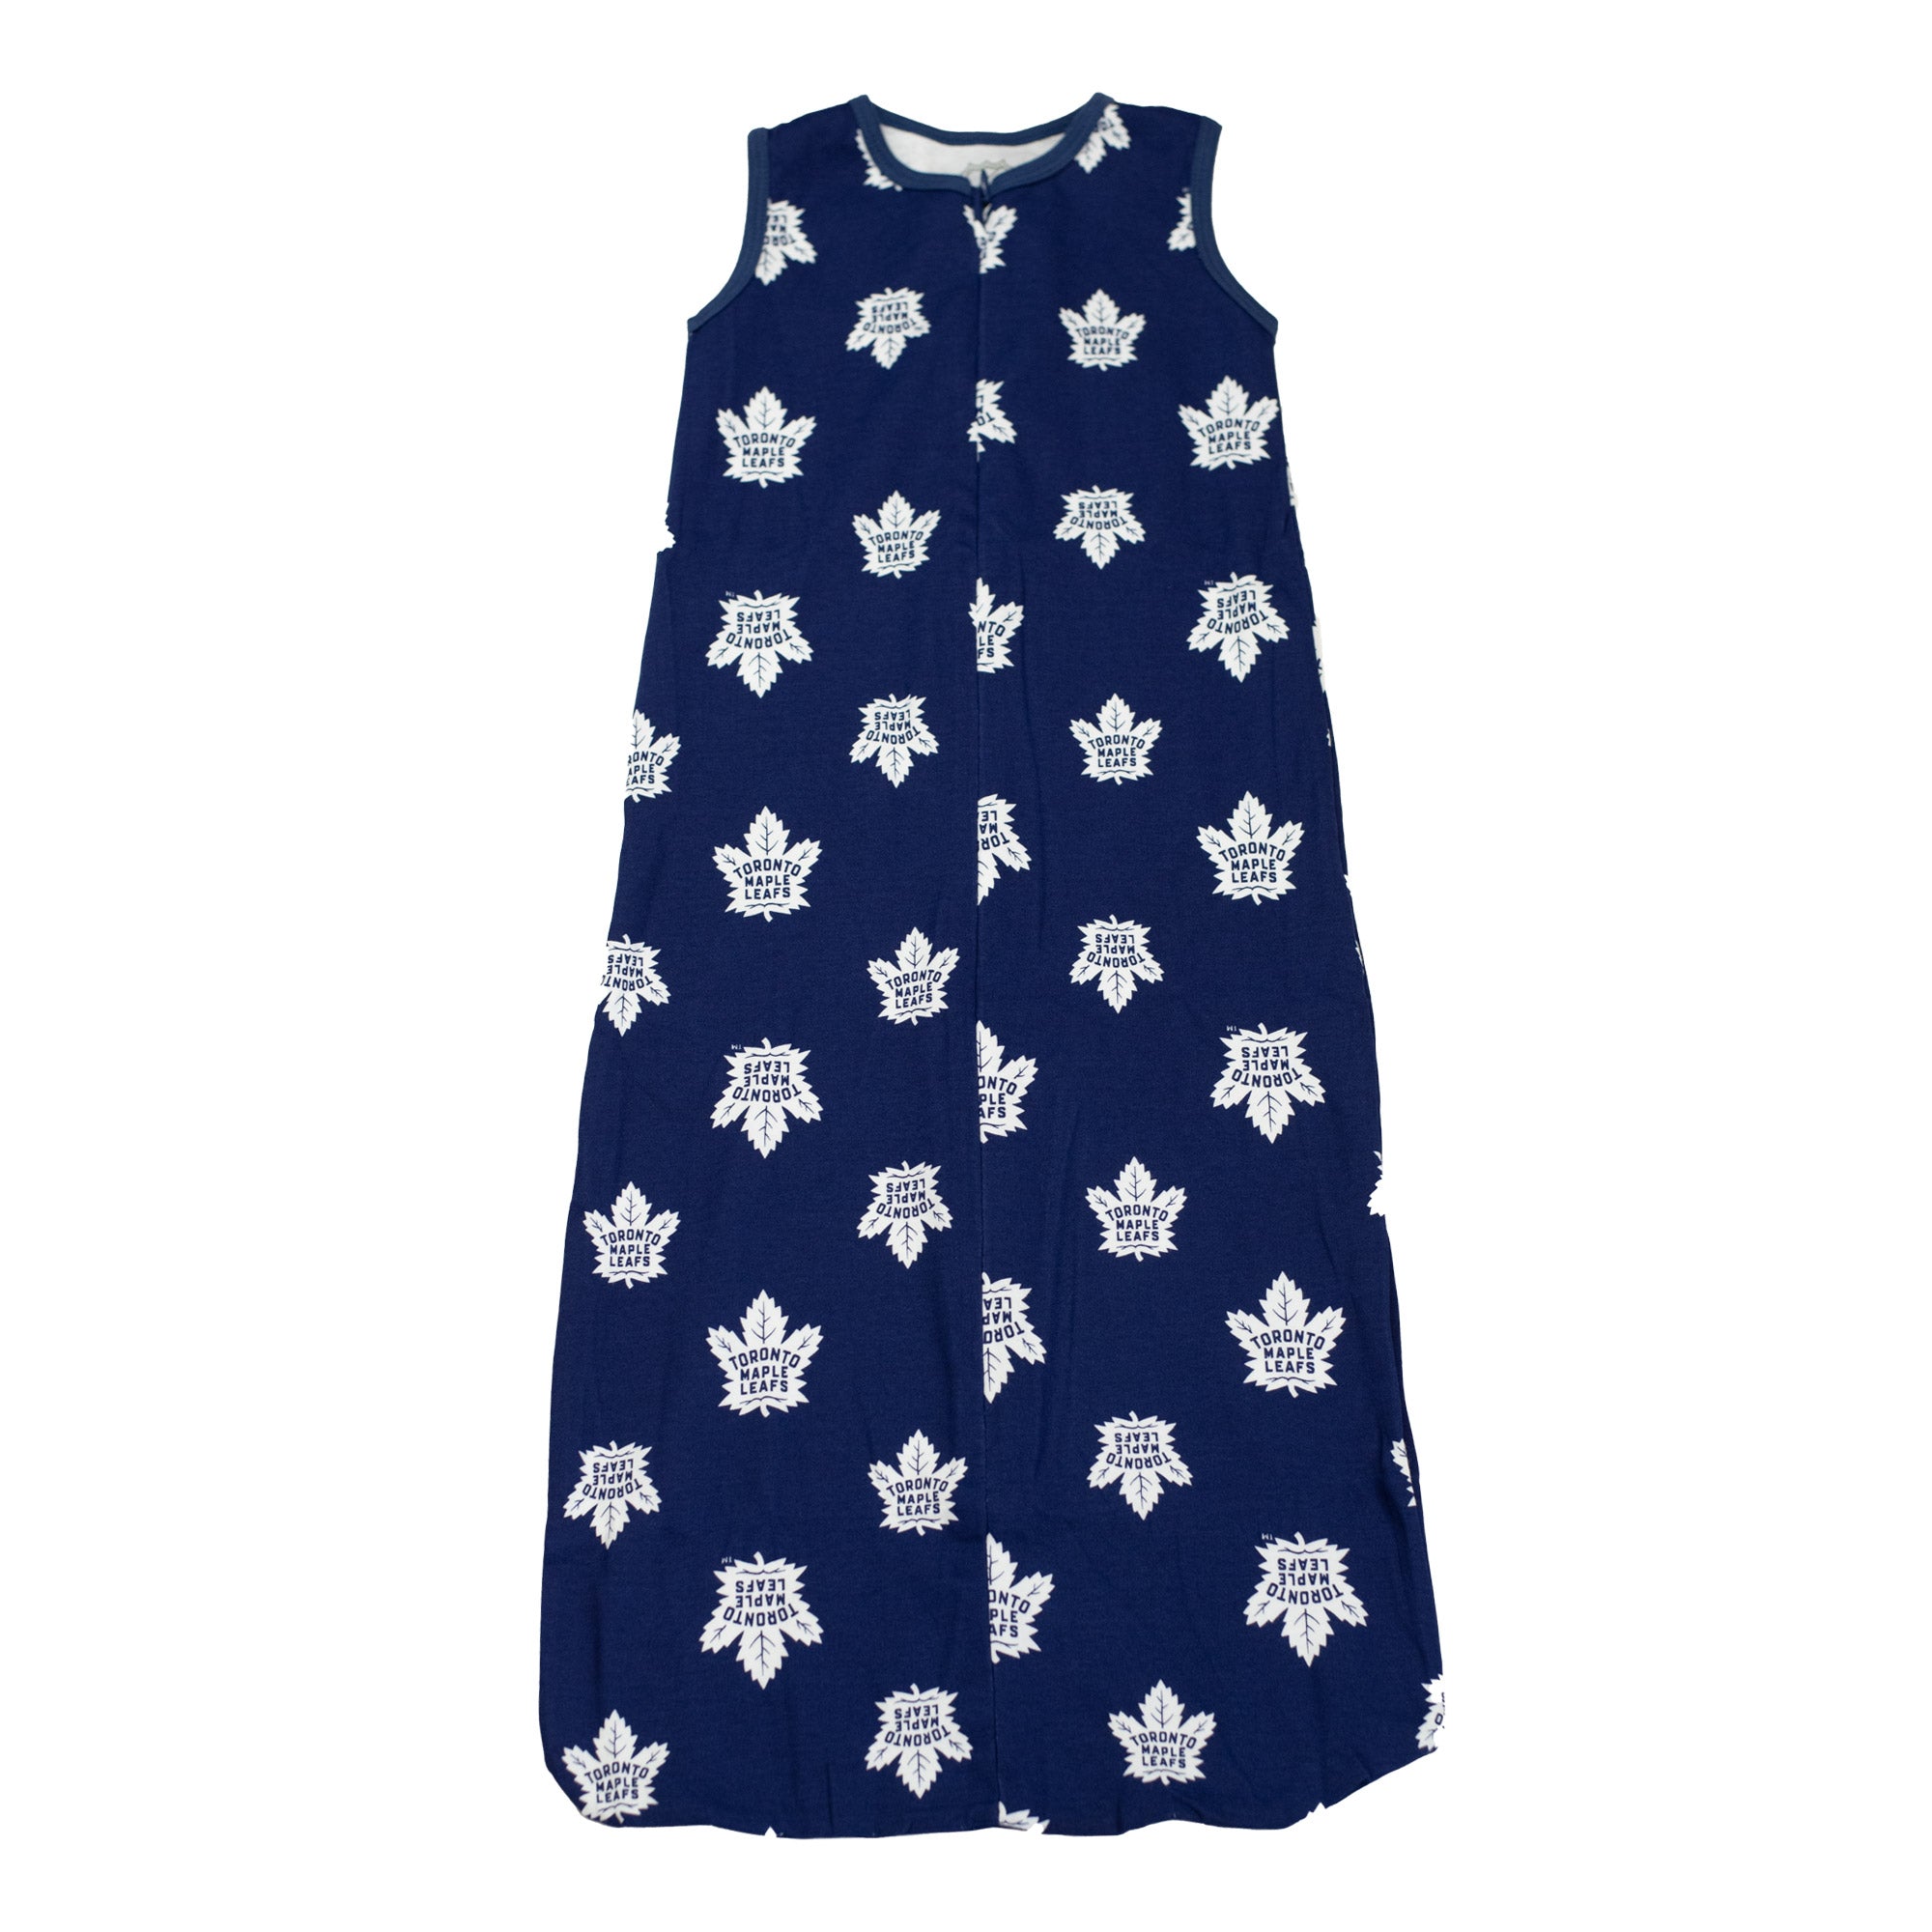 Maple Leafs Infant Snug As A Bug Swaddle 2 Pack